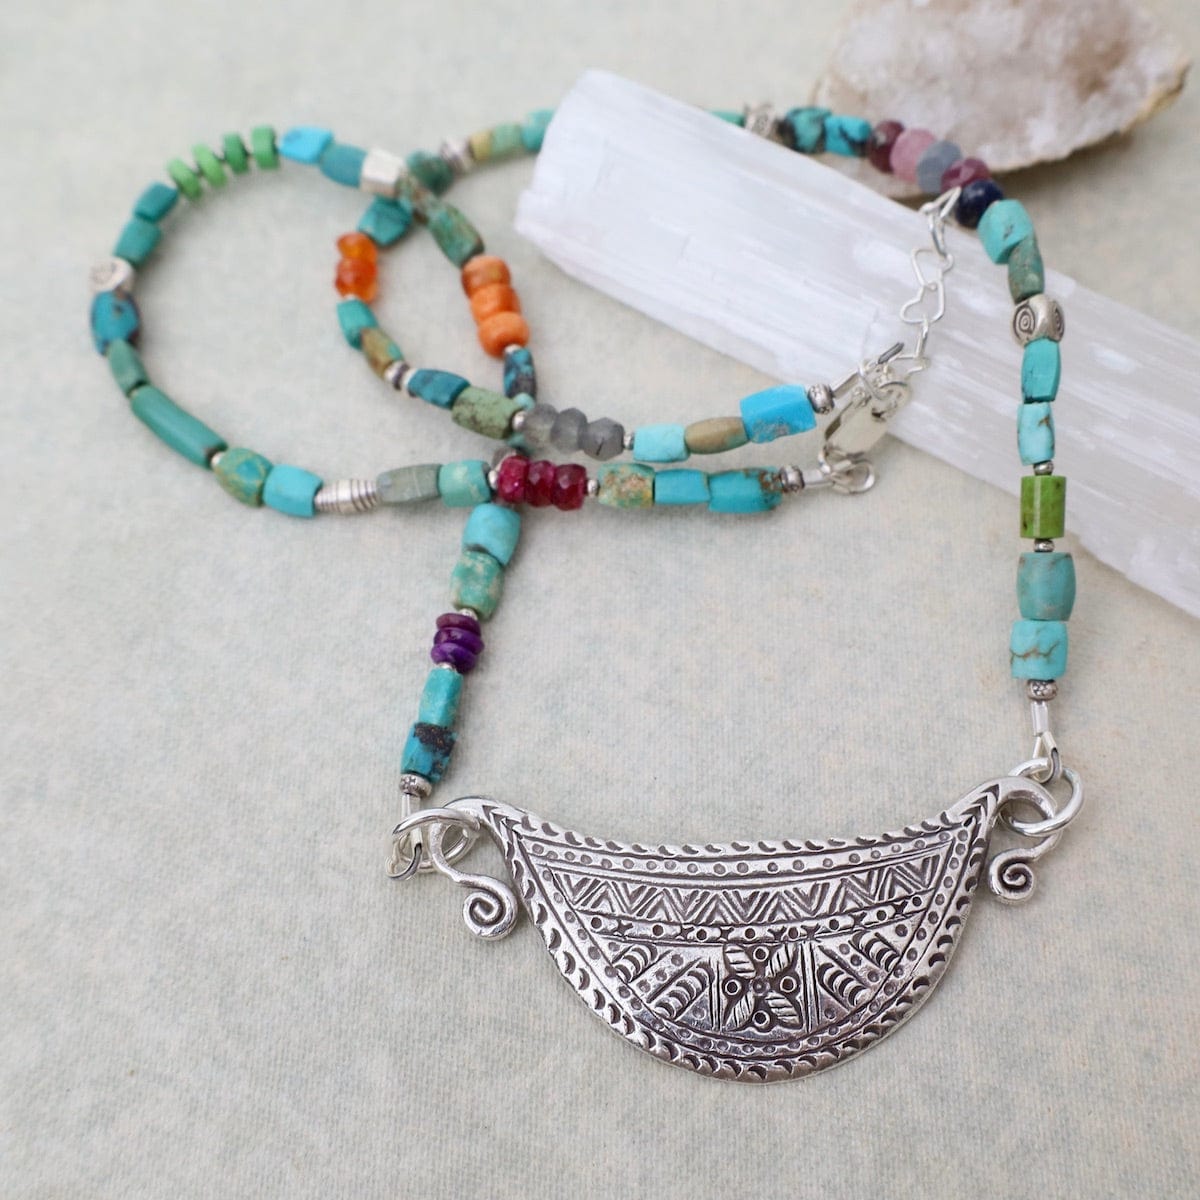 NKL Chunky Turquoise Silver Spirit Lock Necklace